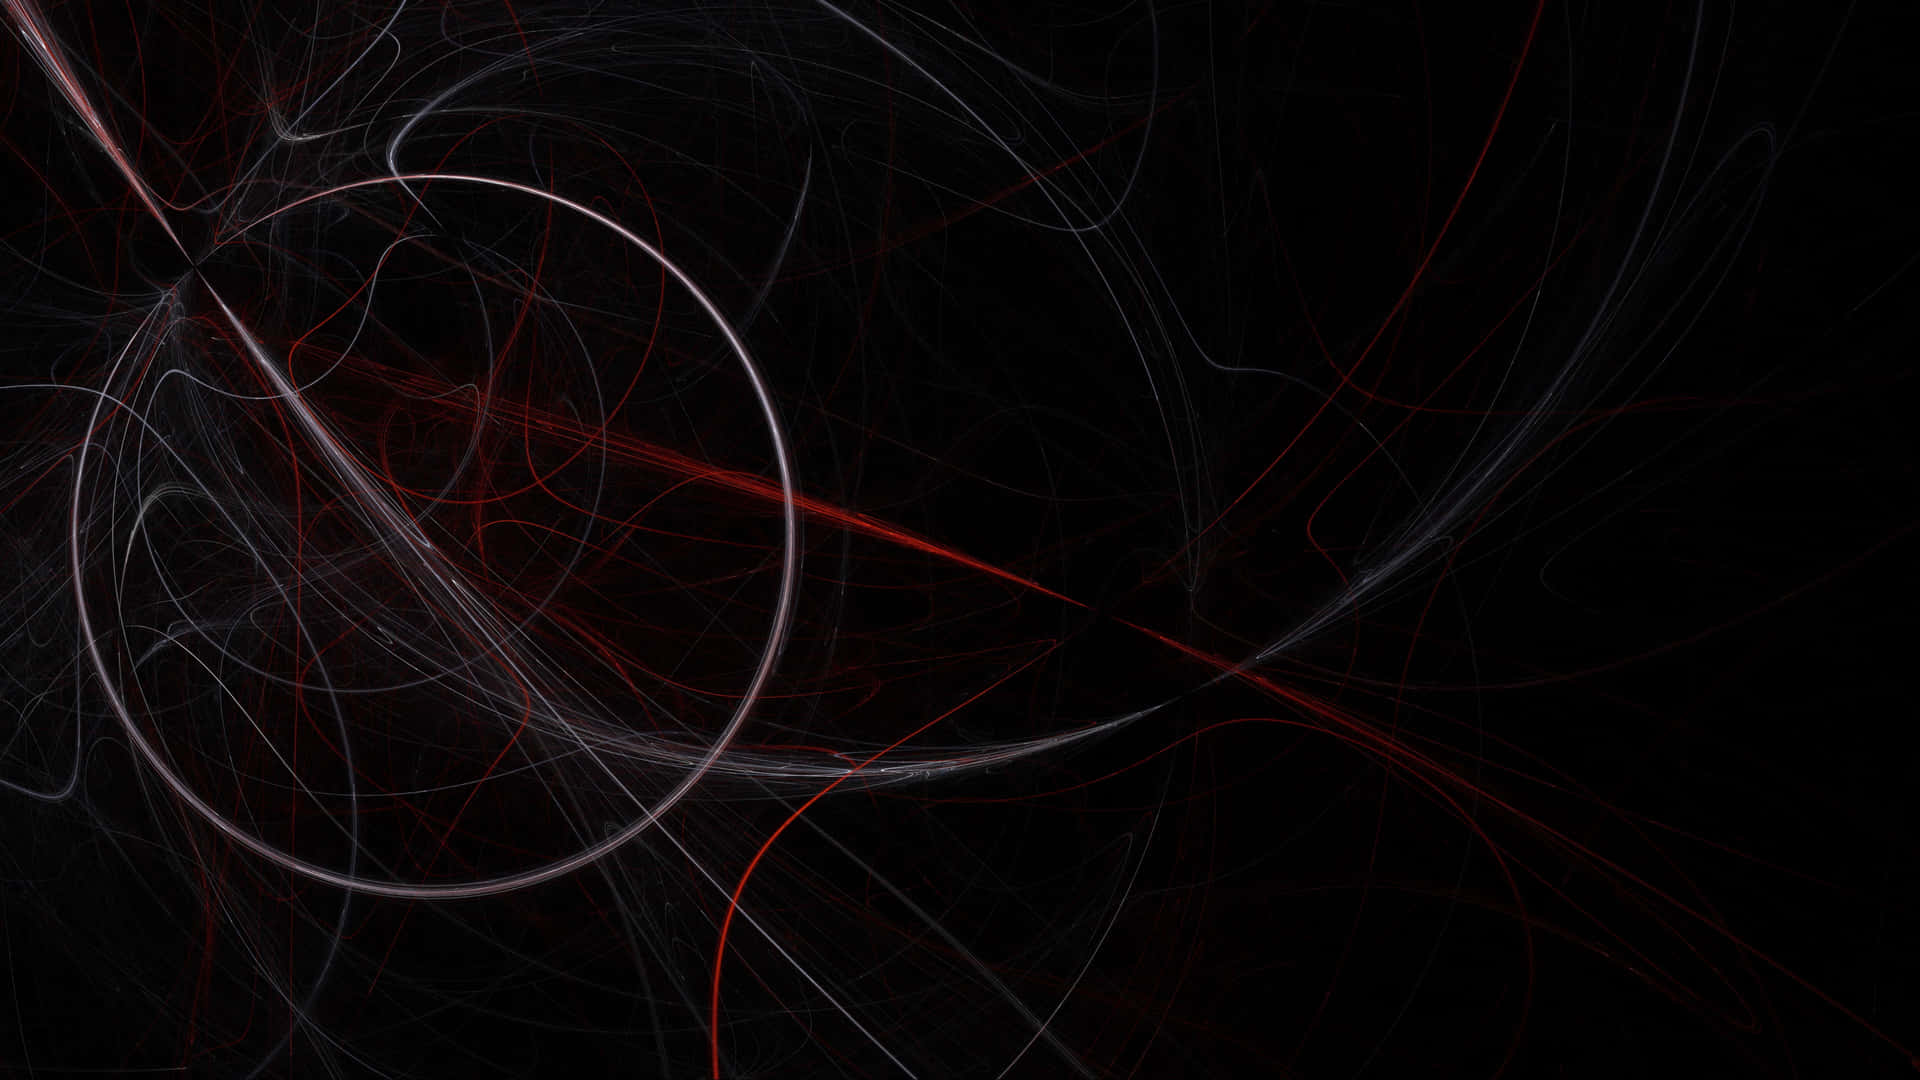 Dark Divinity - Mysterious and Powerful Abstract Art Wallpaper